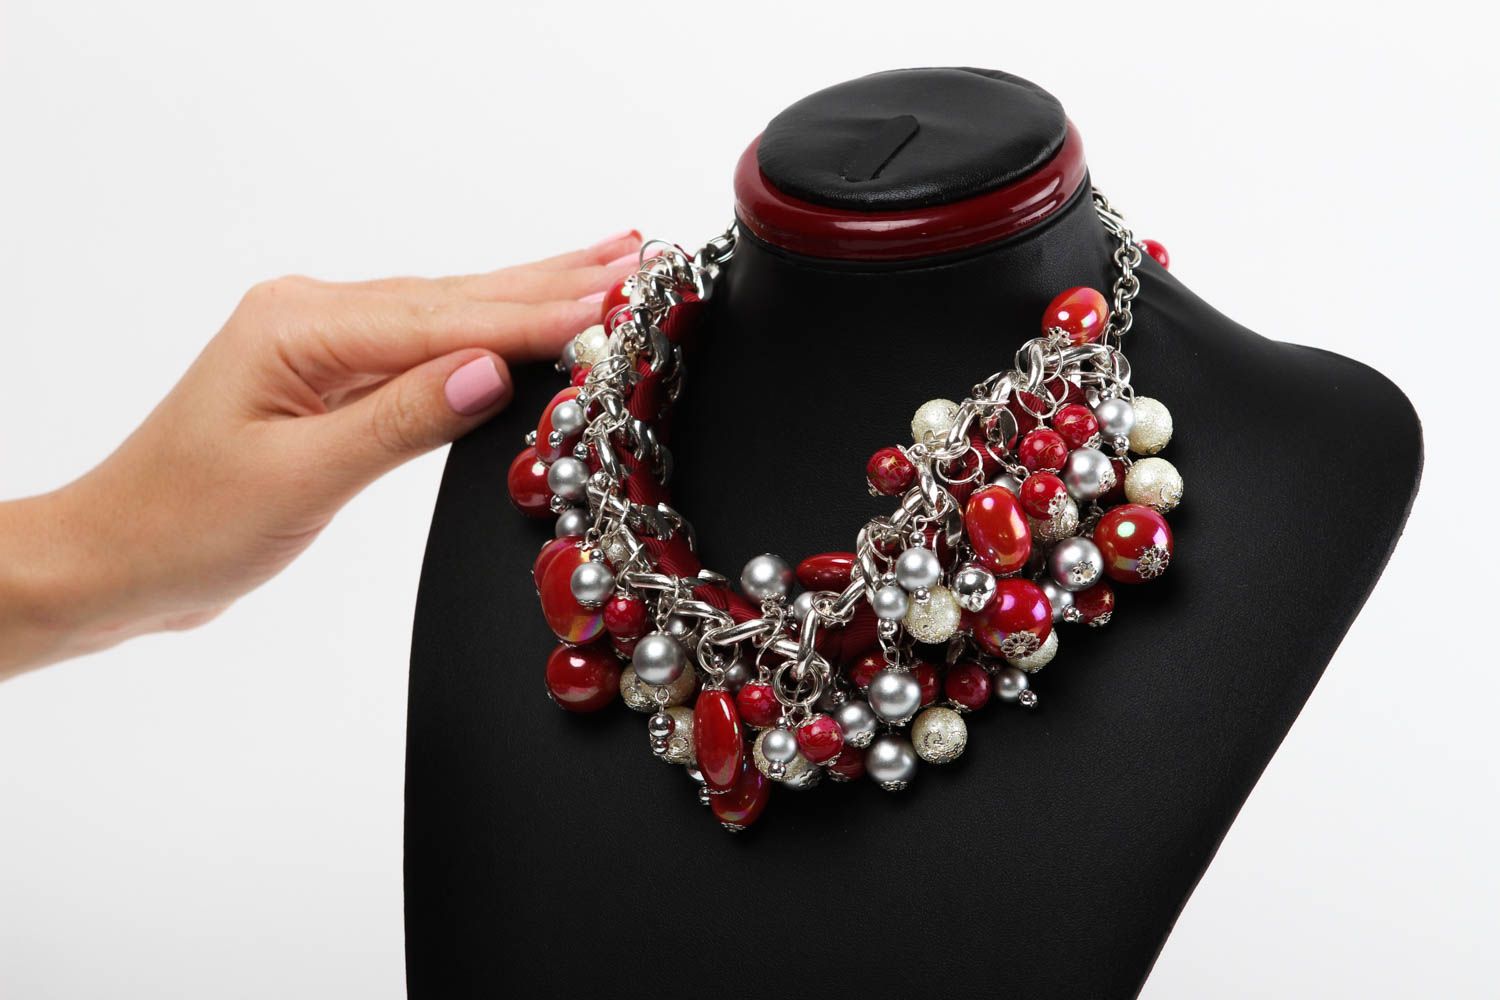 Handmade necklace fashion necklace beaded jewelry best gifts for women photo 5